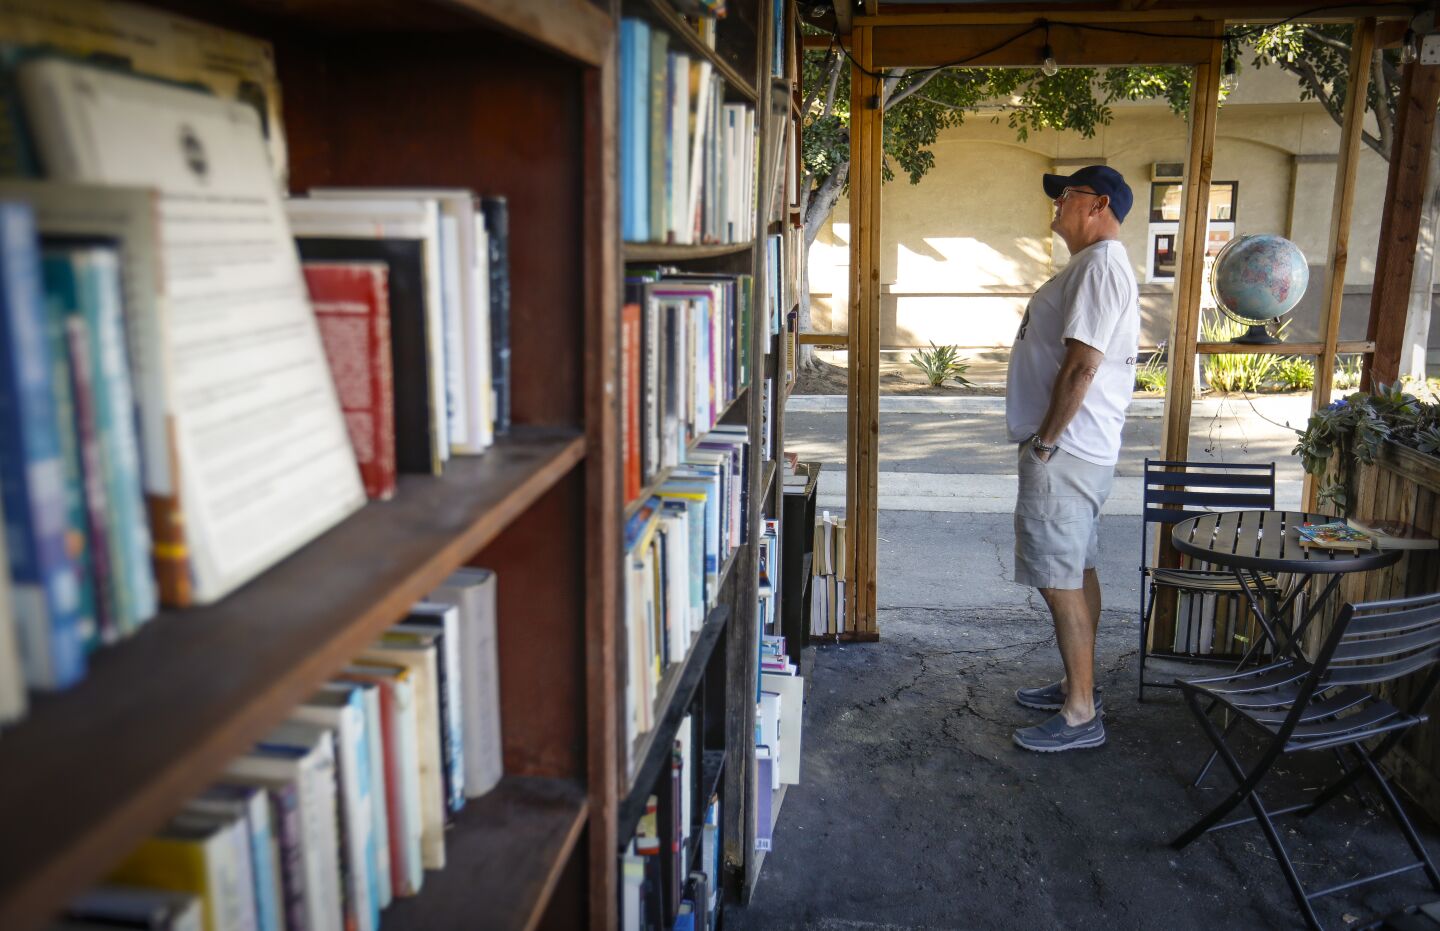 Mike Riege of Vinton, Iowa browses the books in the community library portion of Lhooq Books, outside the funky vintage bookstore in Carlsbad Village. Sean Christopher, the owner recently received a 60-day eviction notice for both the shop and the adjoining house where he has raised his son, alone. He's hoping to achieve a stay of eviction on the property long enough to sell off his book inventory and find a new space without going bankrupt and ending up homeless with his son.